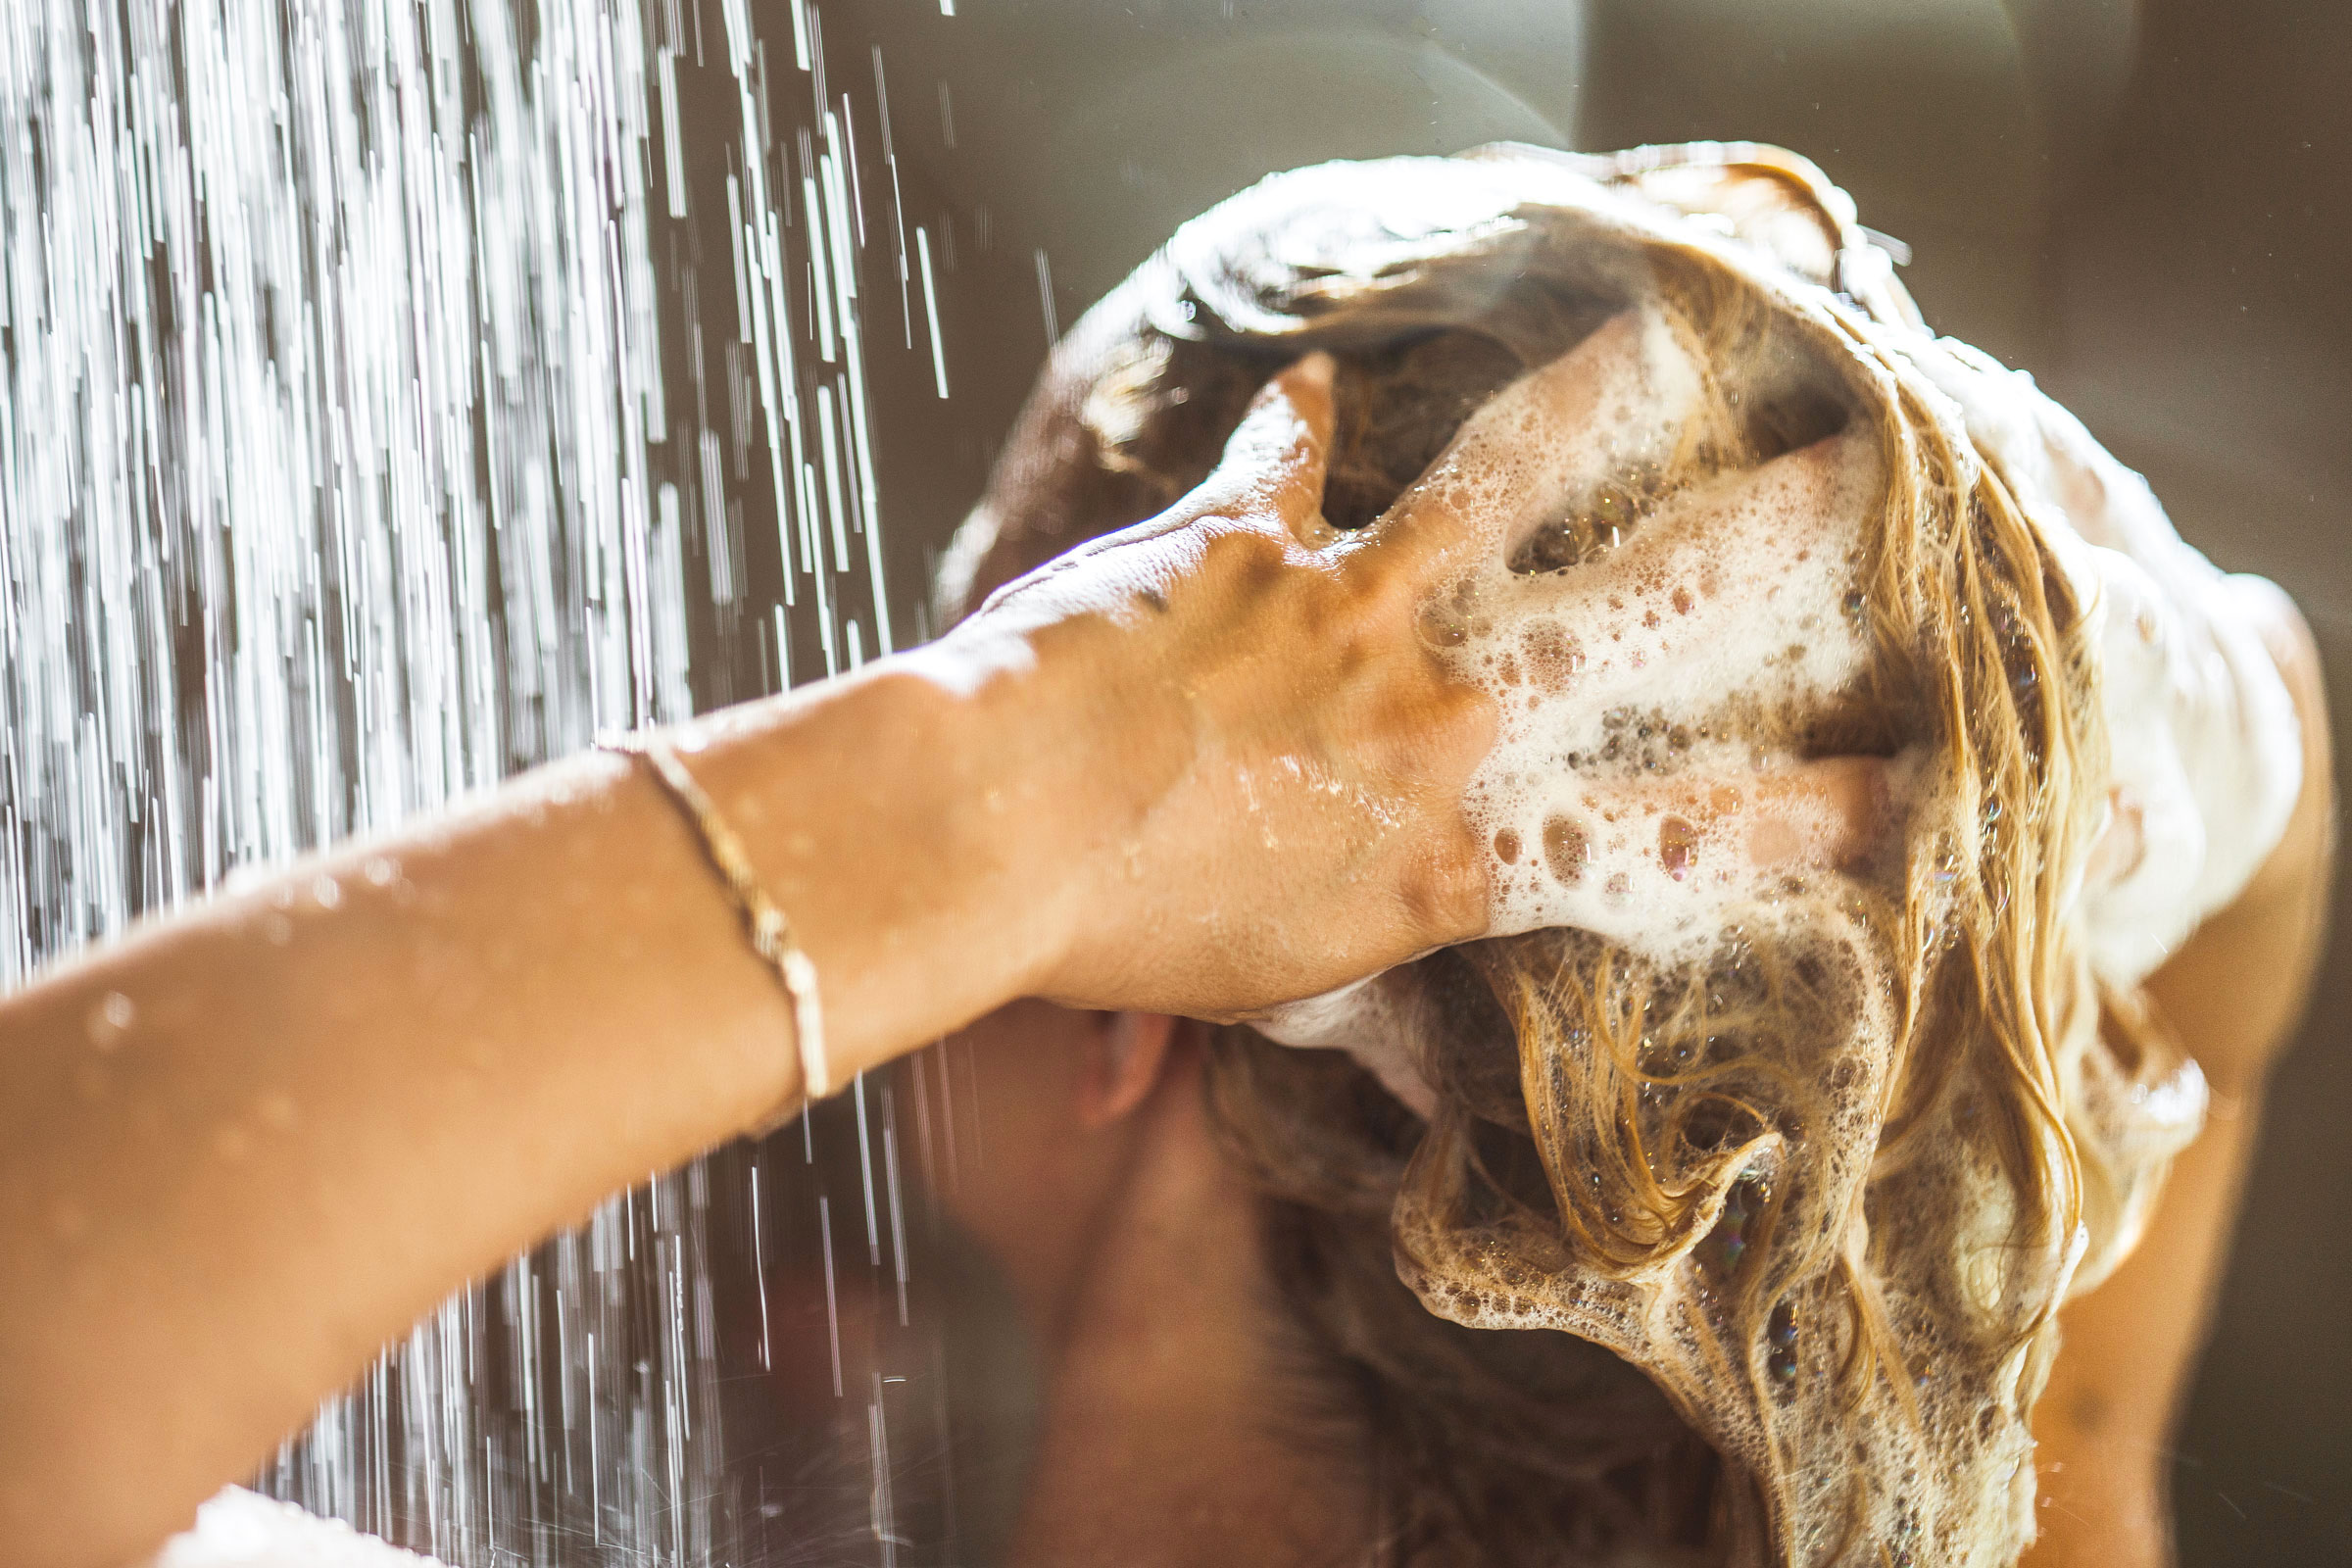 A person with long blond hair shampoos their scalp with both hands in the shower.